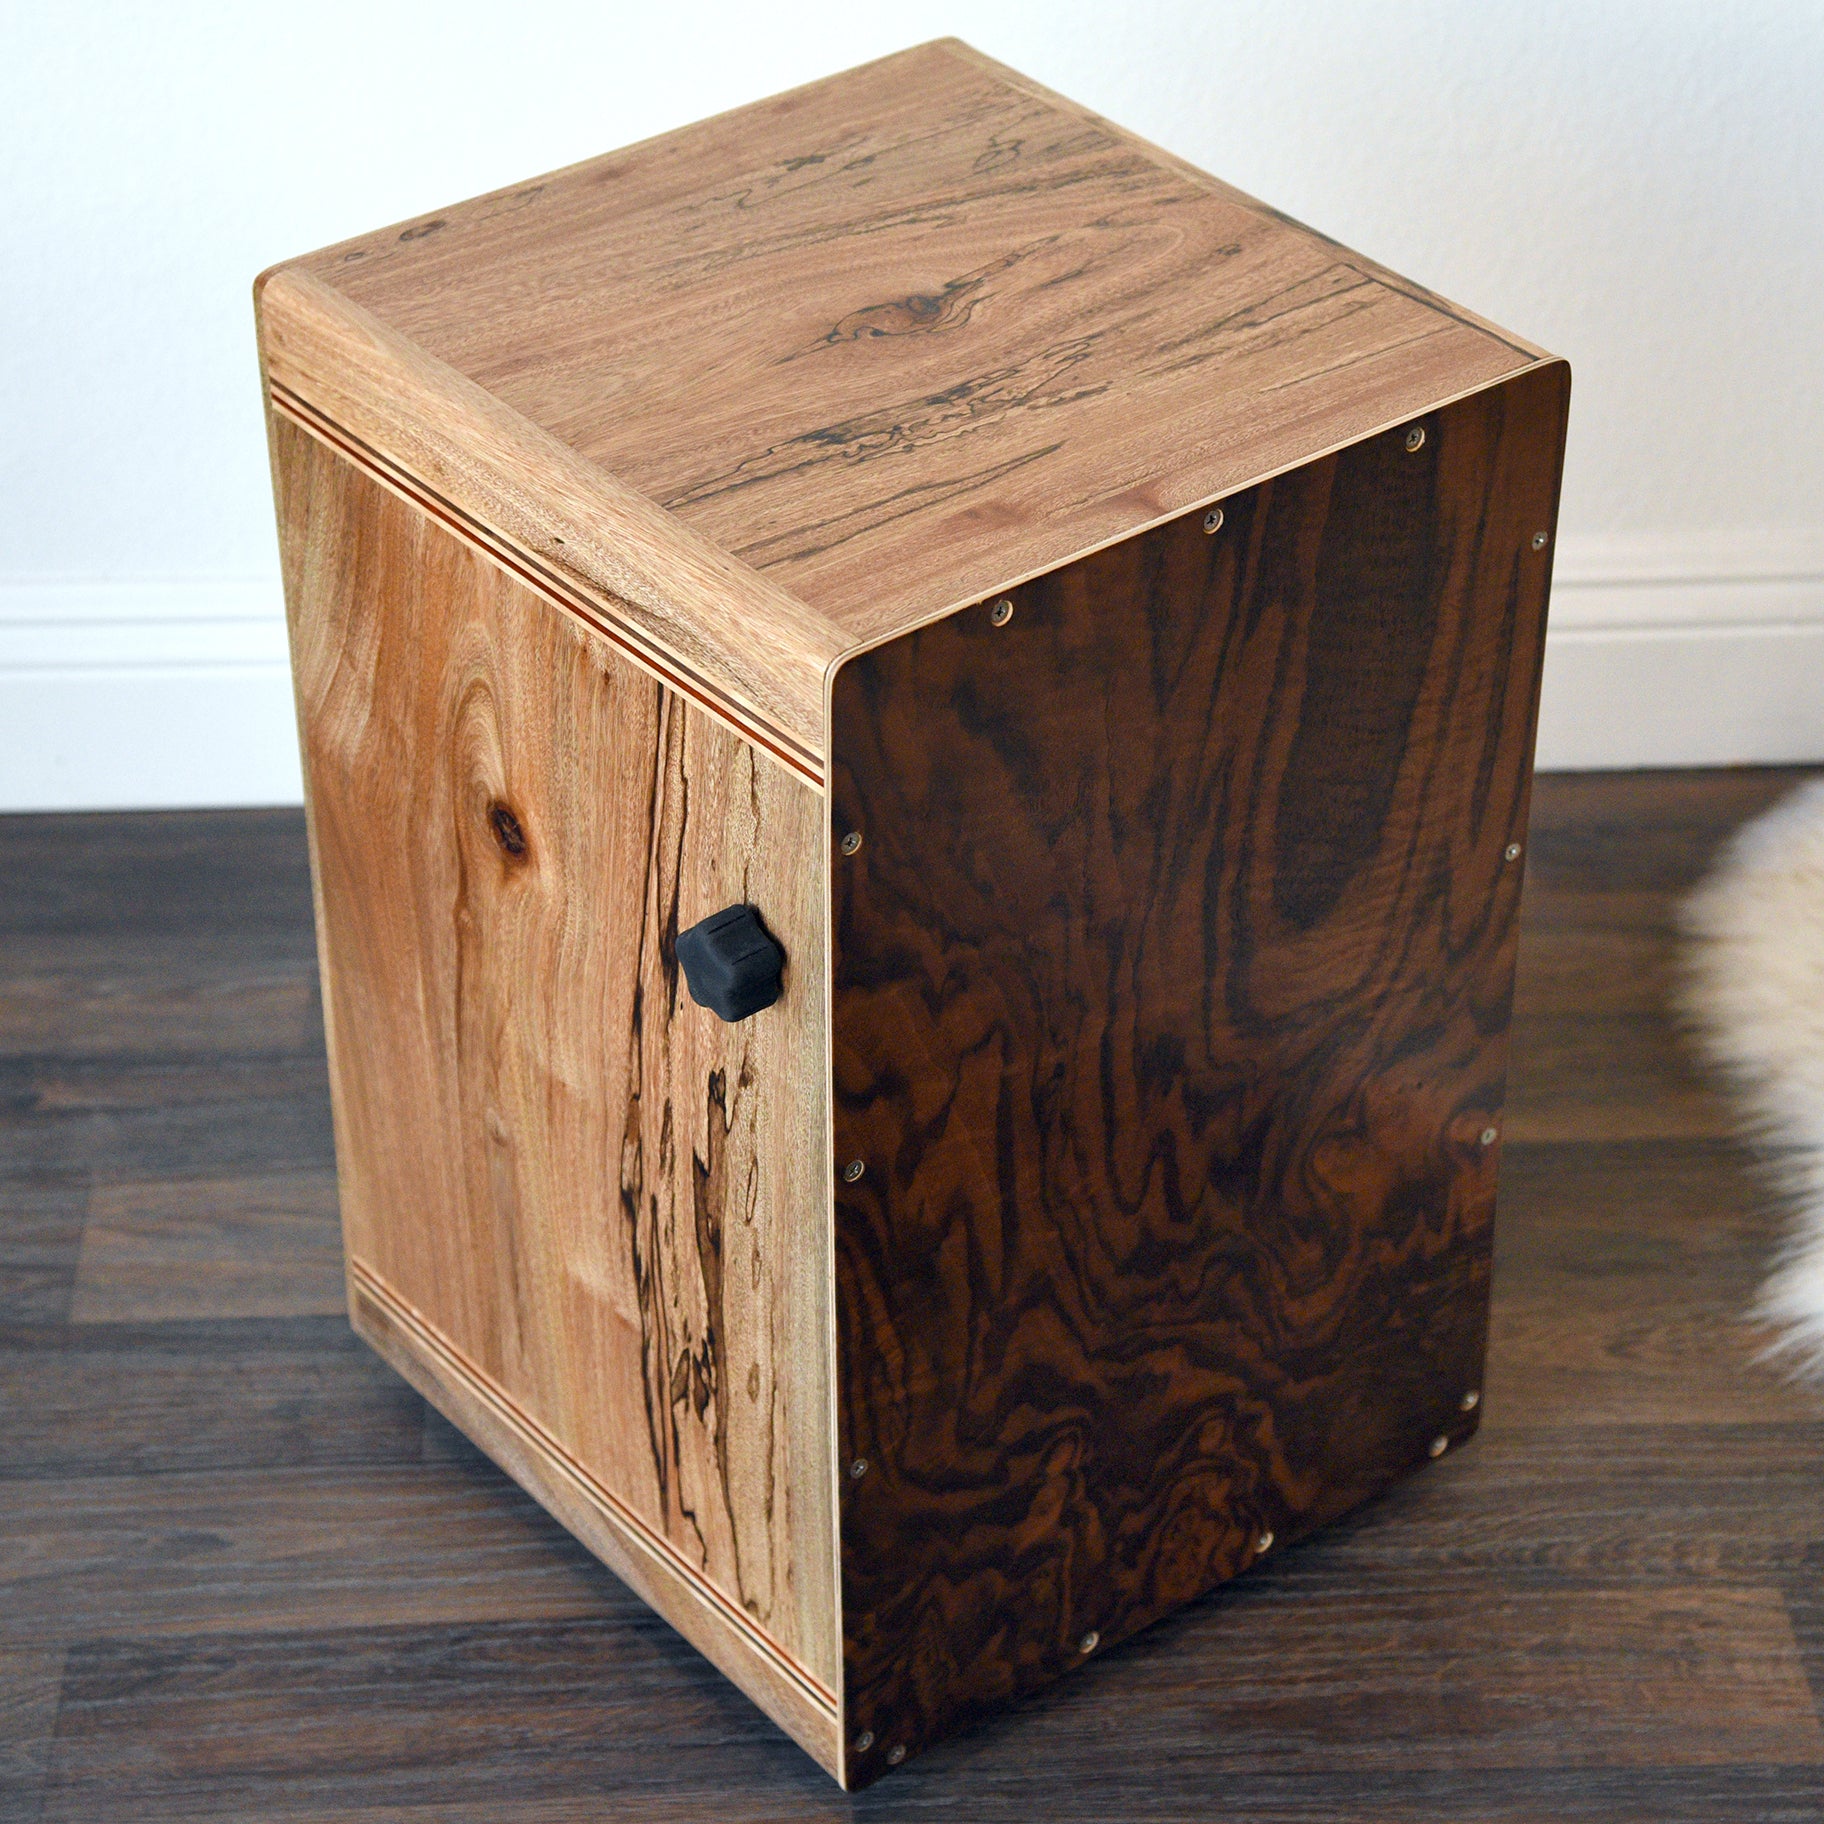 Handcrafted Wood Handmade Cajon Drum - Made in the U.S.A